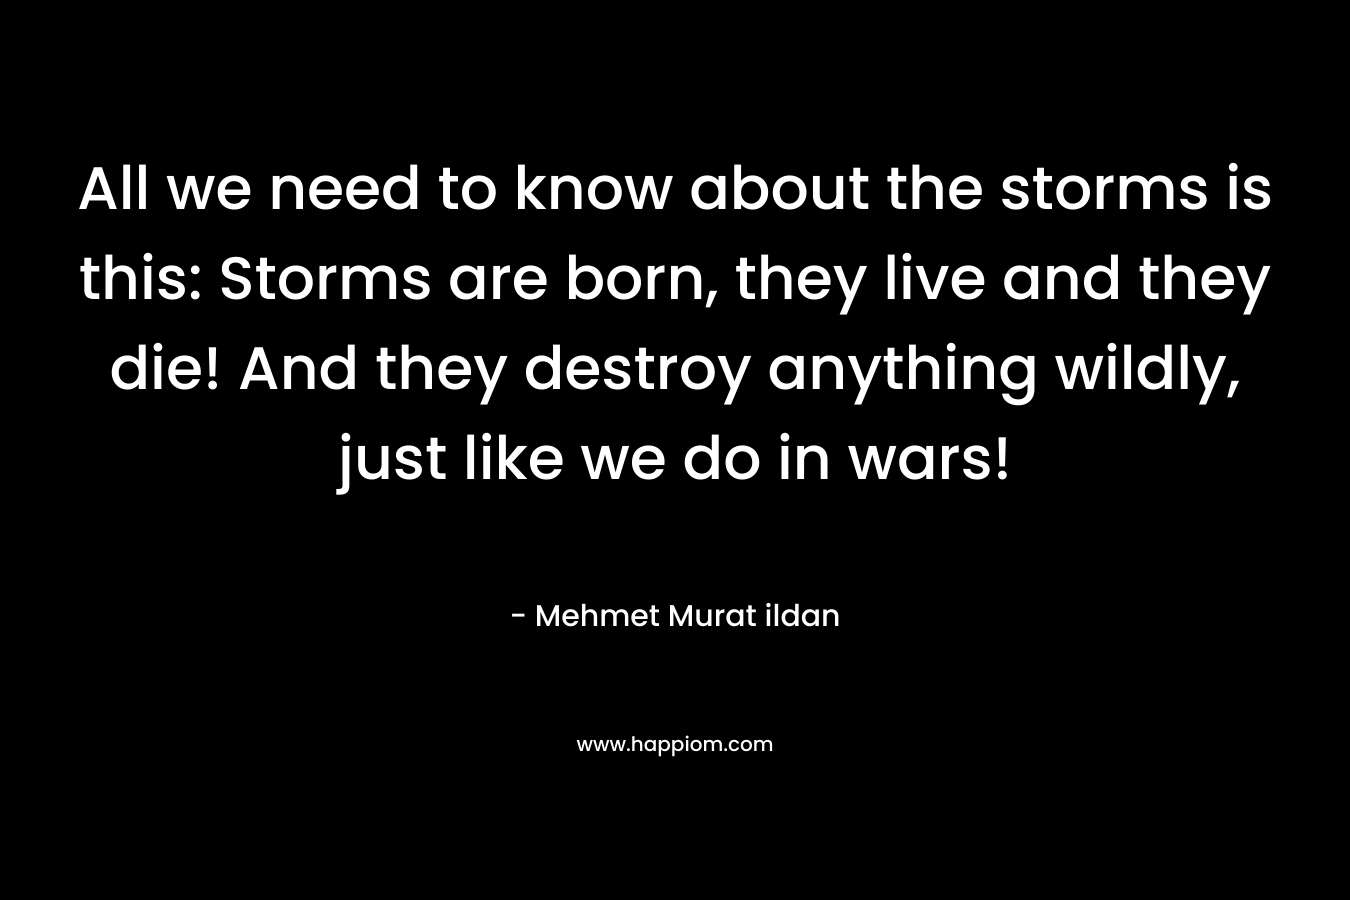 All we need to know about the storms is this: Storms are born, they live and they die! And they destroy anything wildly, just like we do in wars! – Mehmet Murat ildan